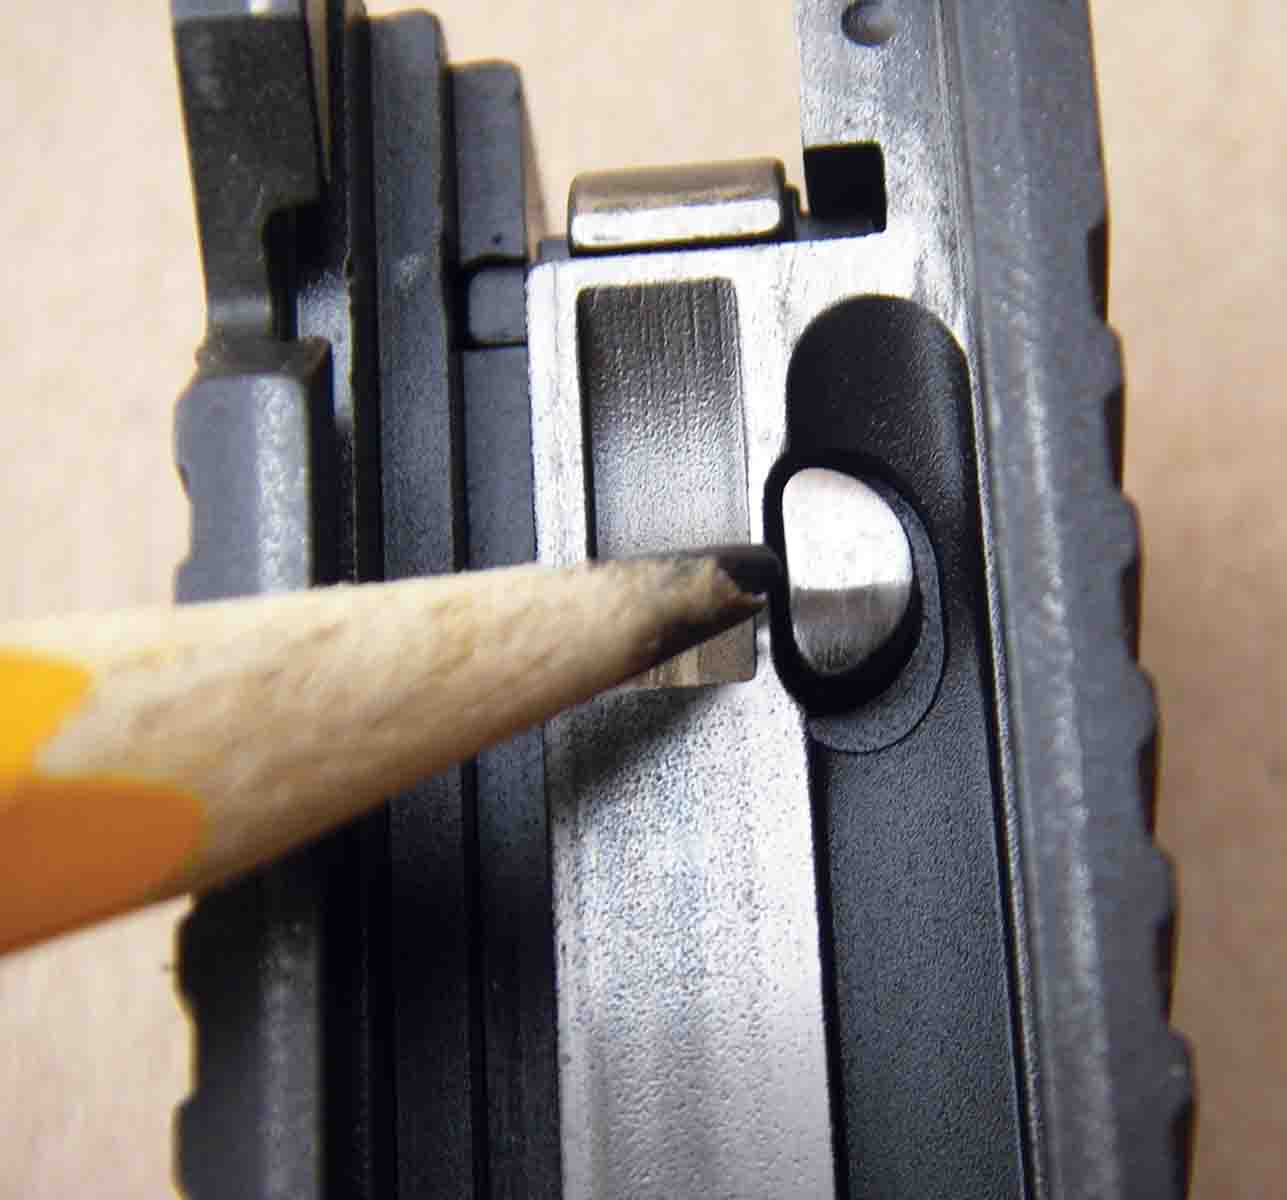 Kimber’s “Firing Pin Safety System” was first offered in 2001 and consists of an internal safety within the slide that prevents  firing if the pistol is dropped.